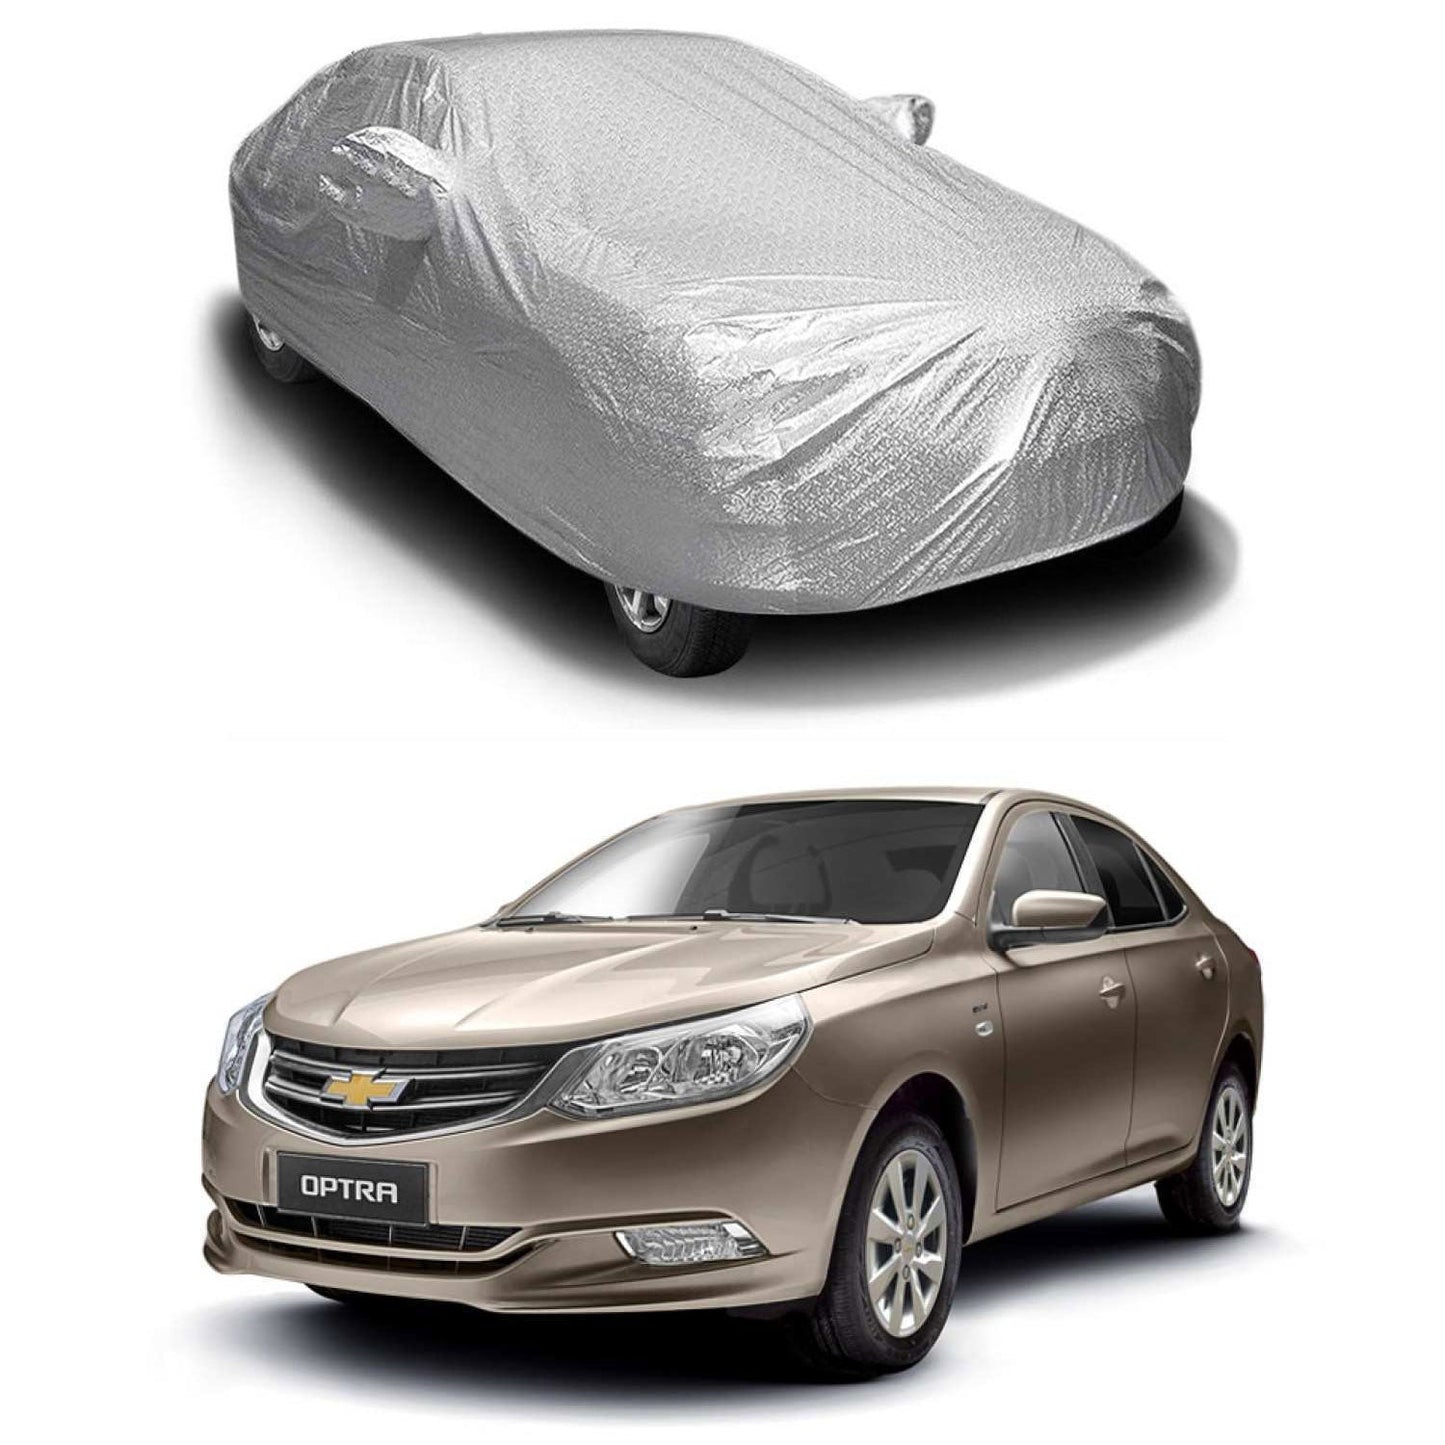 Oshotto Spyro Silver Anti Reflective, dustproof and Water Proof Car Body Cover with Mirror Pockets For Chevrolet Optra